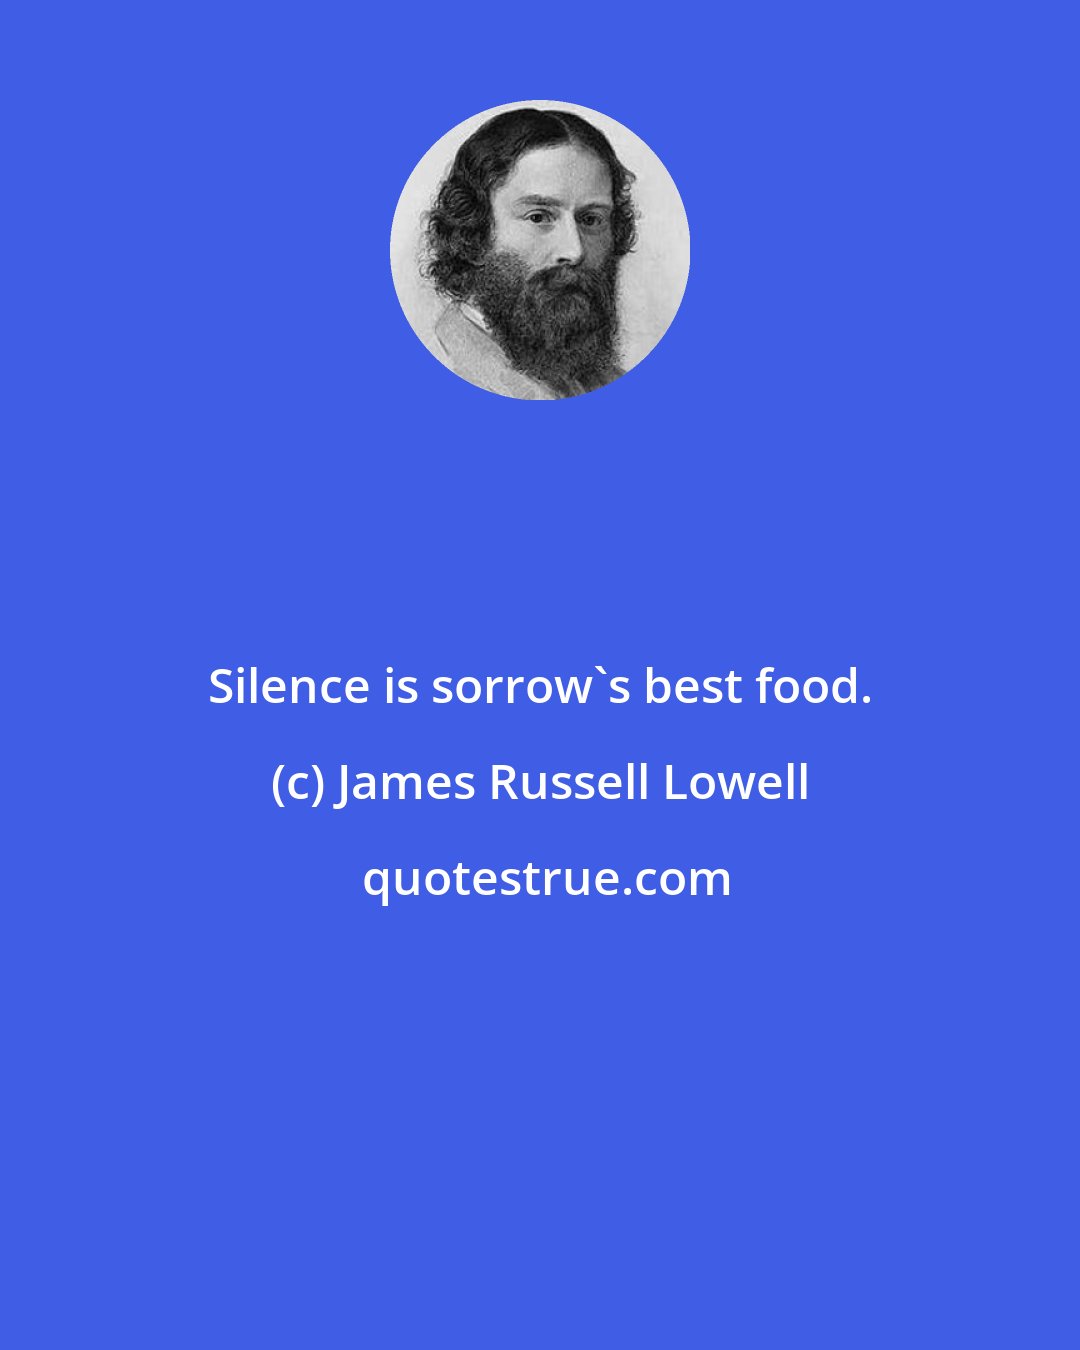 James Russell Lowell: Silence is sorrow's best food.